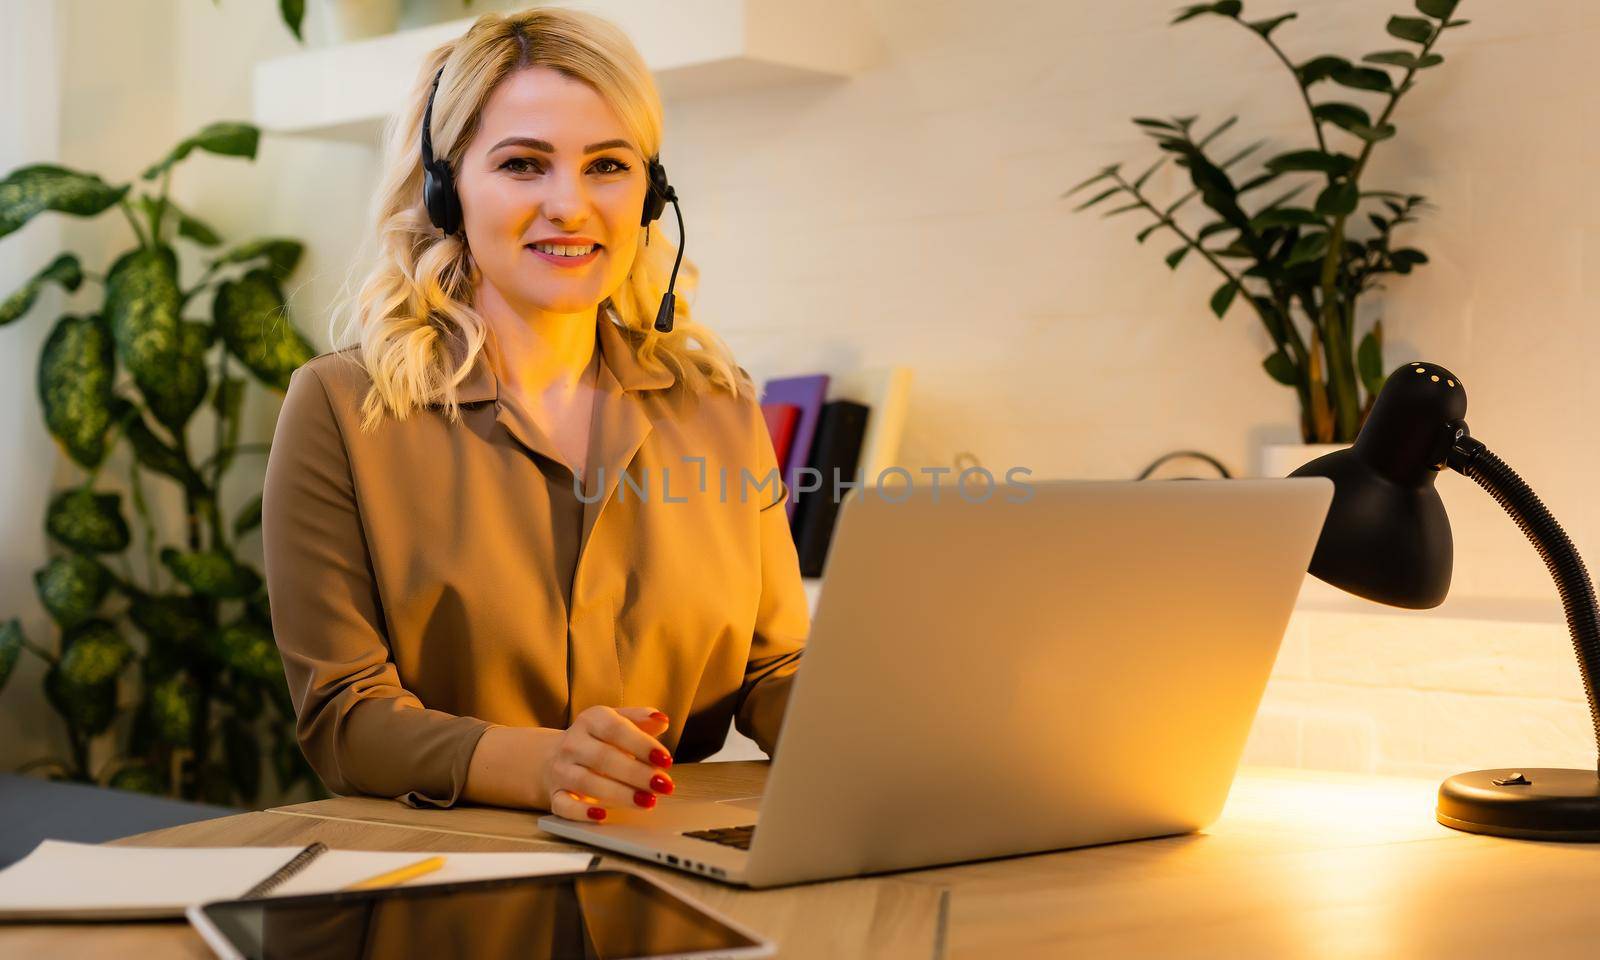 A happy woman girl works remotely from home and communicates via video call with friends and relatives in her office. Distance learning and work online. Using computer.